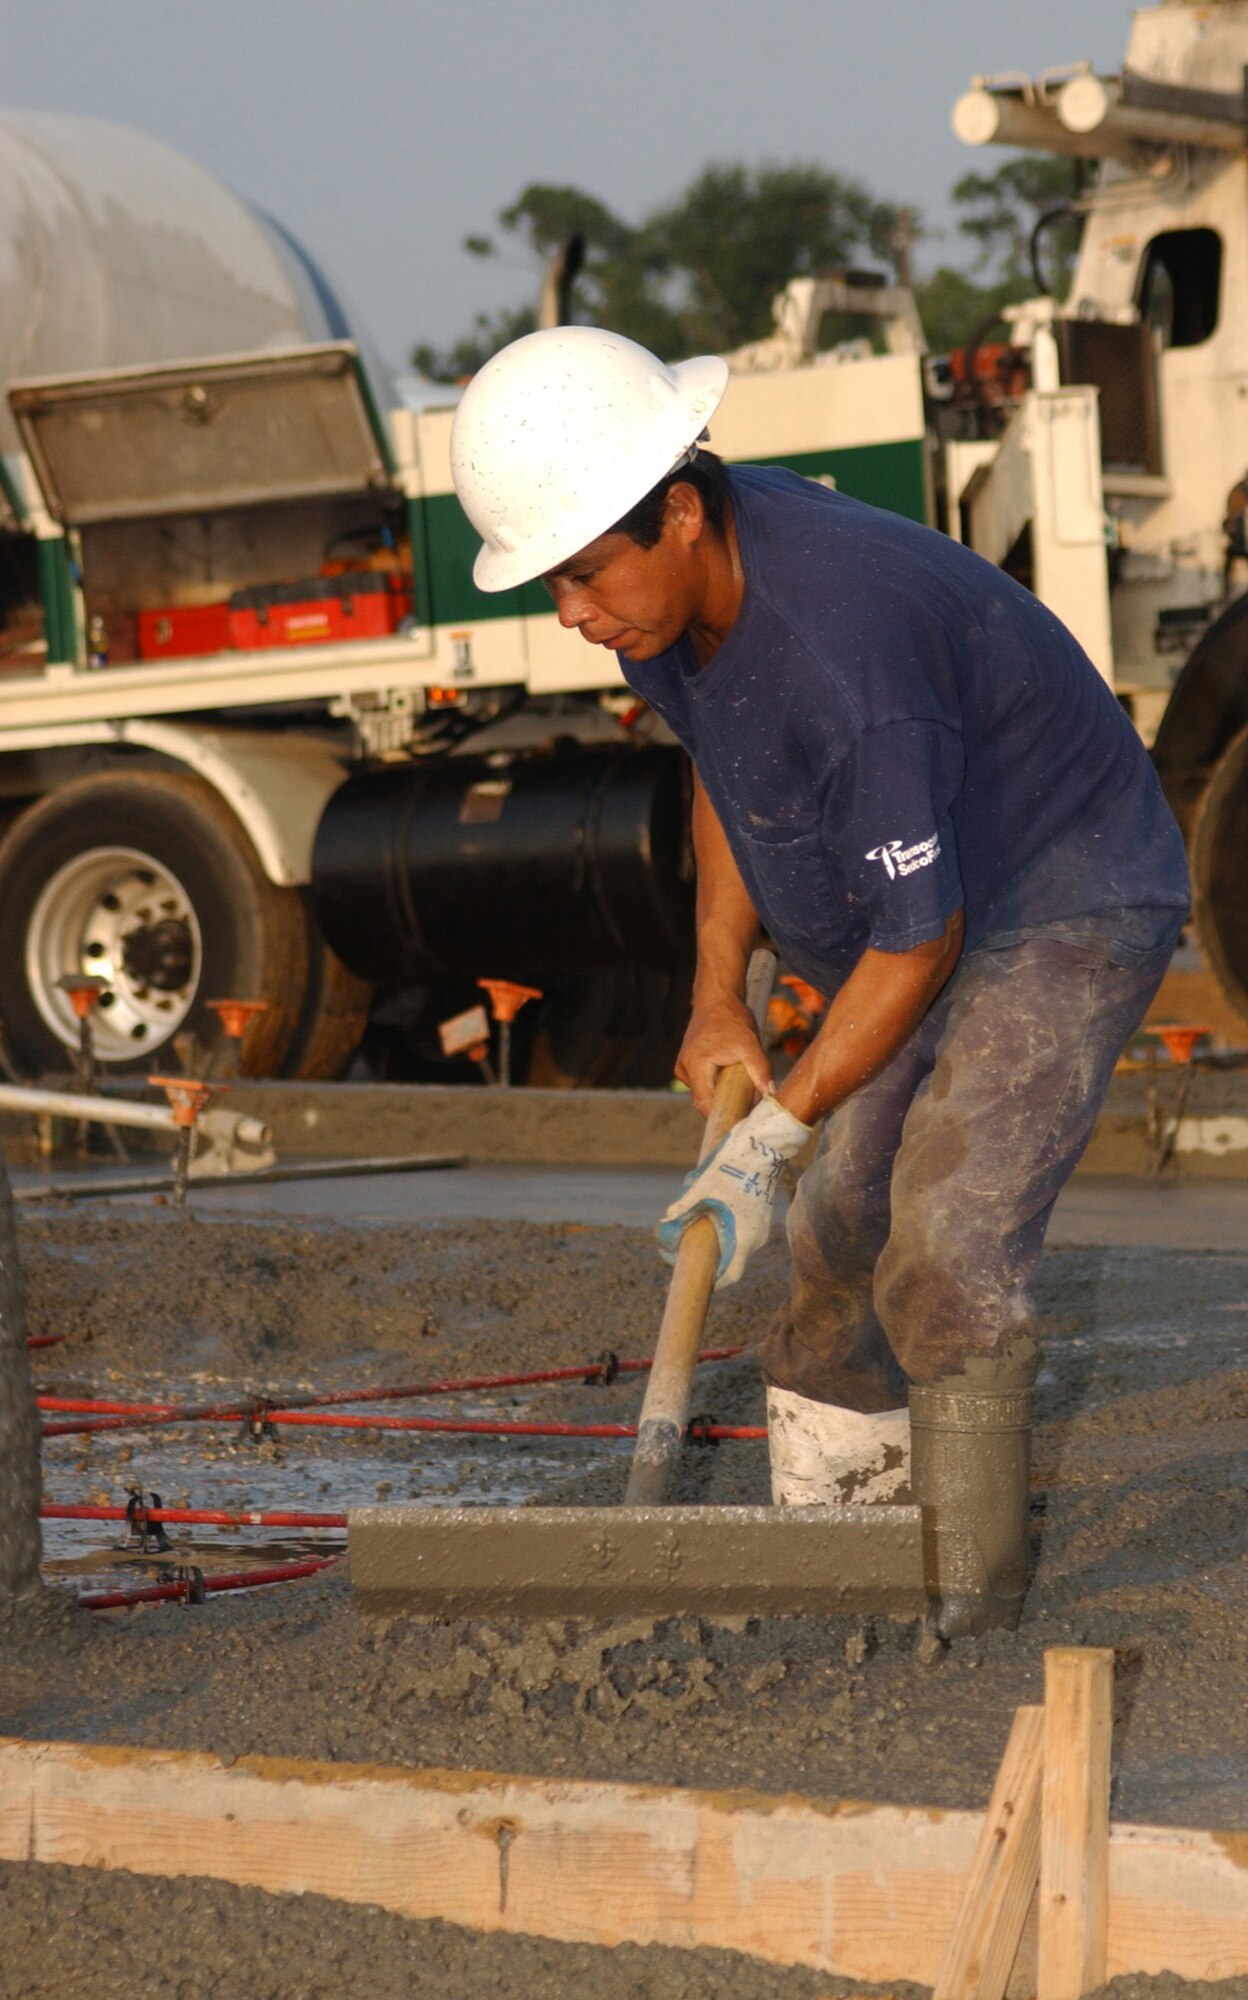 Contractor Apoliwar Zamora smooths a slab for a new home in Thrower Park,  where walls went up Wednesday in for the first unit in the largest military family housing project in Air Force history.   The $287.8 million program is building 1,028 new homes for Keesler families.  (U.S. Air Force photo by Kemberly Groue)